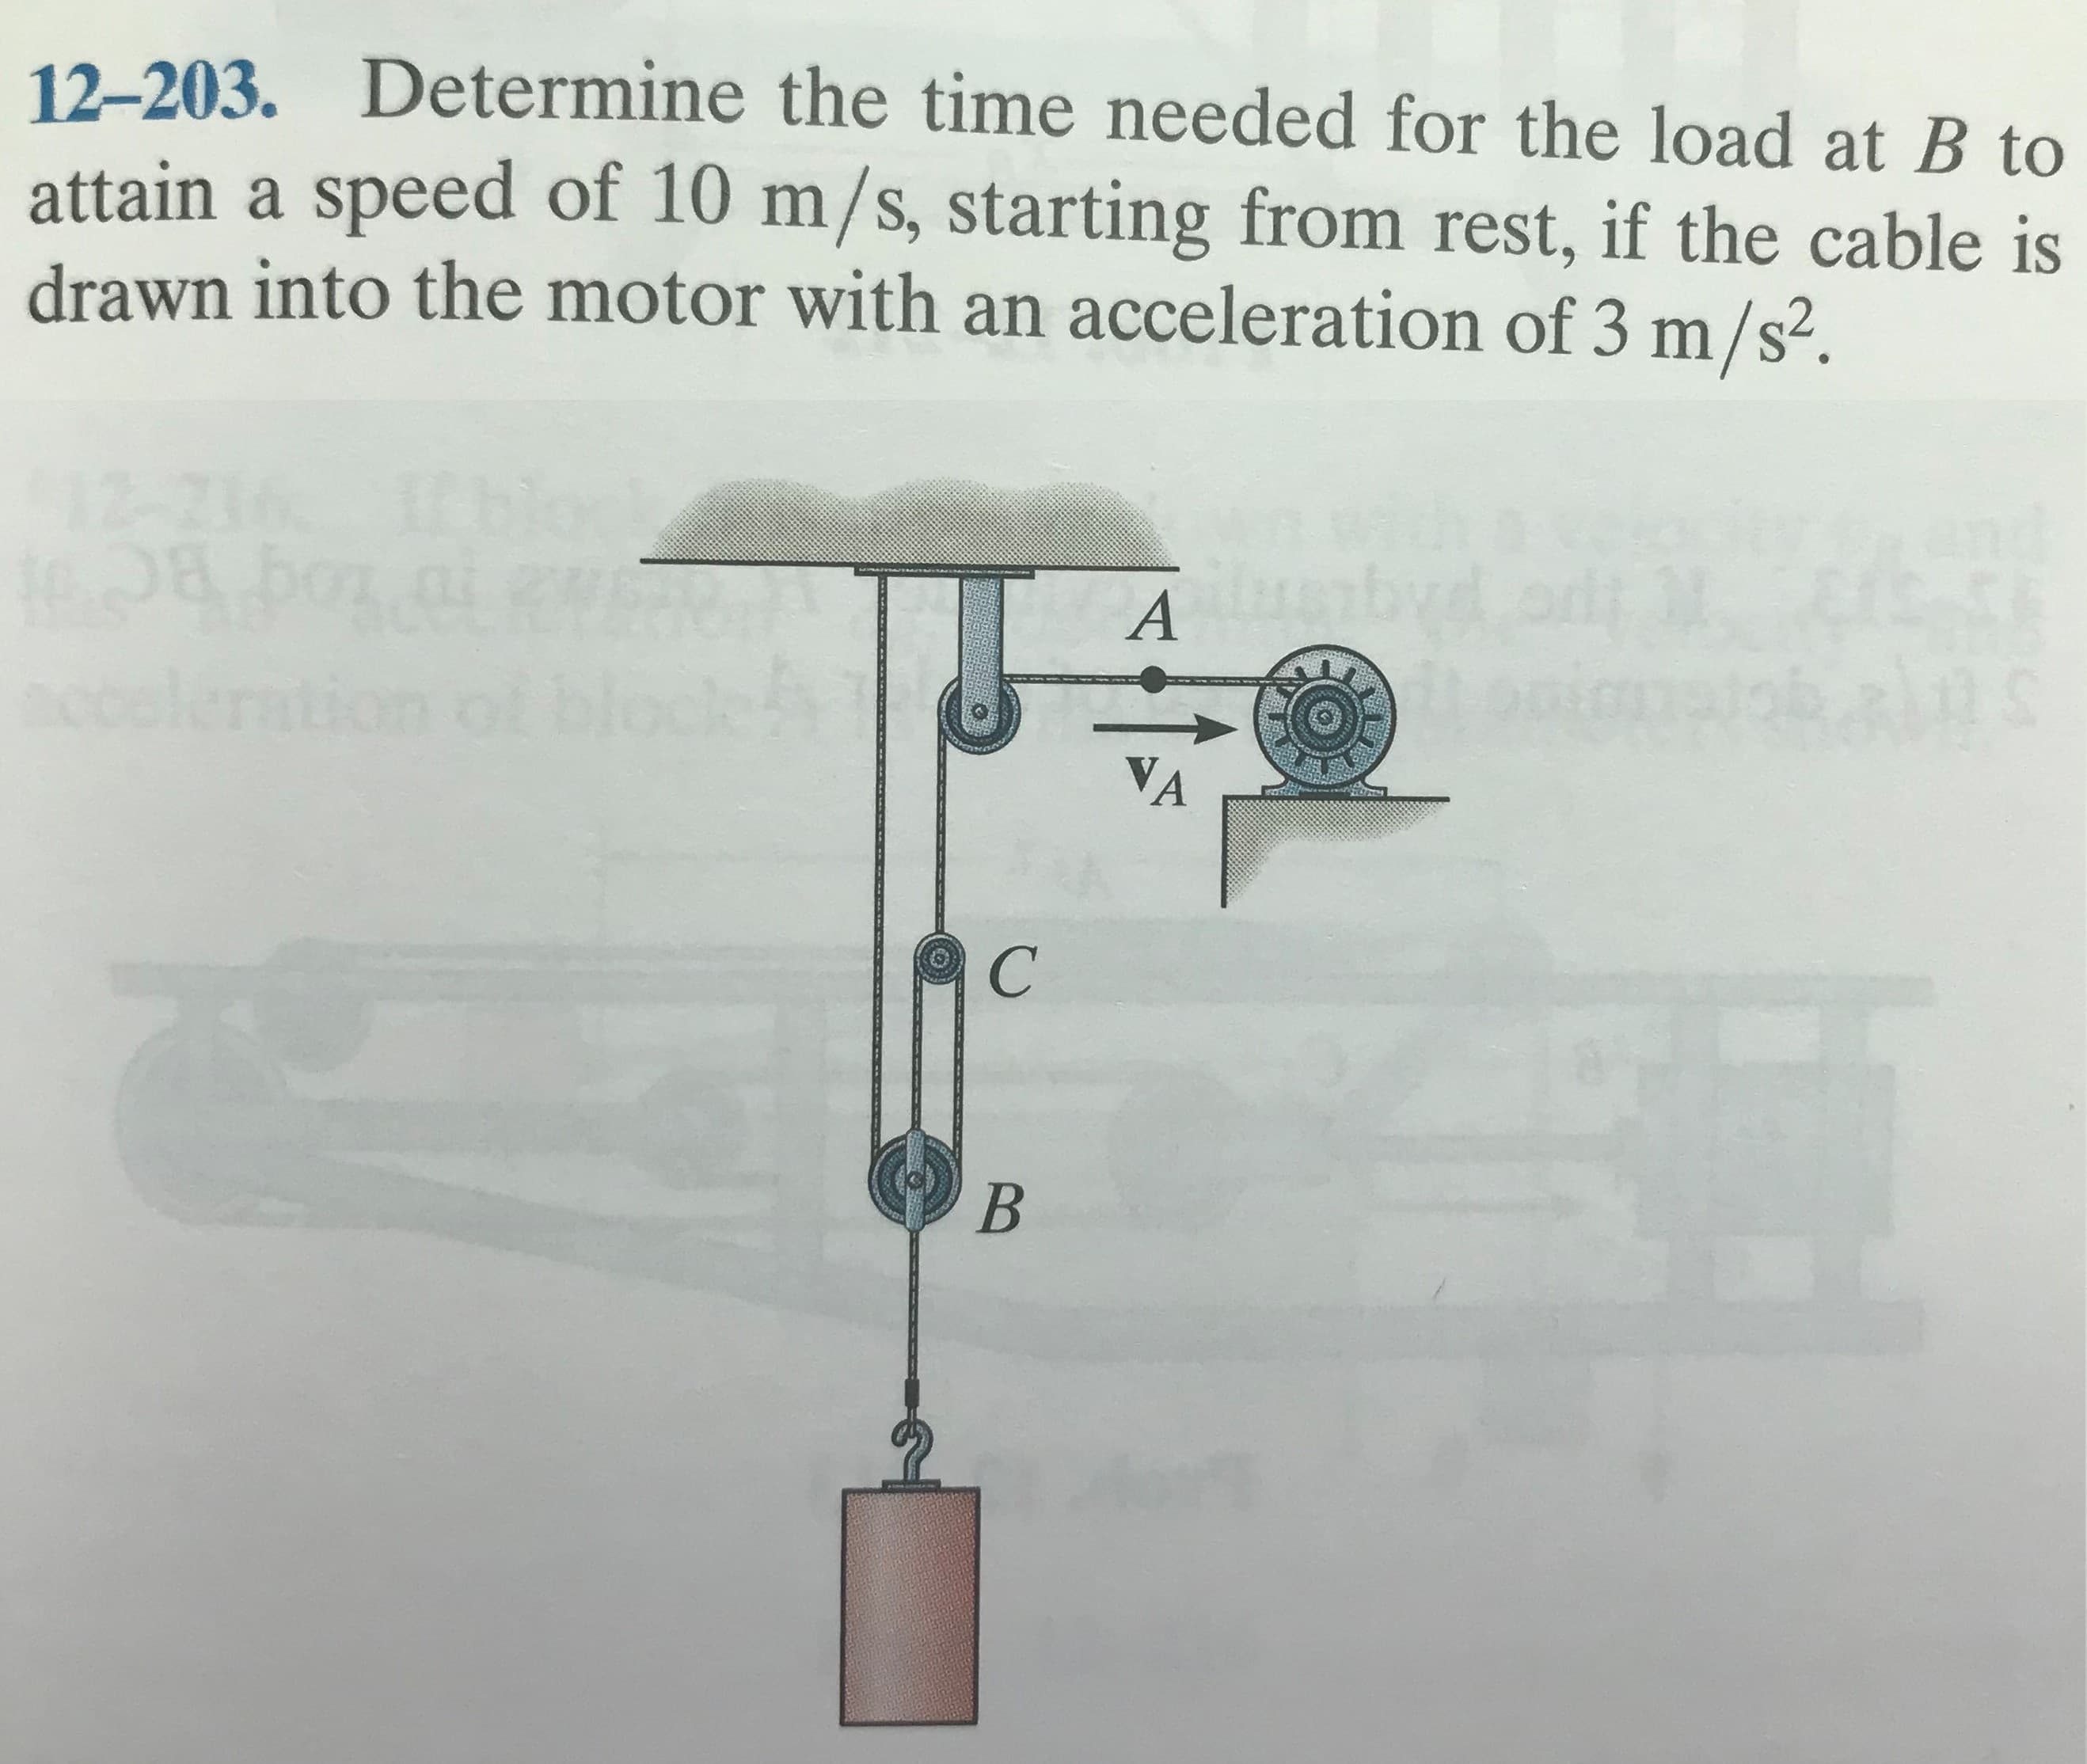 12-203. Determine the time needed for the load at B to
attain a speed of 10 m/s, starting from rest, if the cable is
drawn into the motor with an acceleration of 3 m/s².
ILblo
12-216
Plog ac
blockA
ccele
VA
